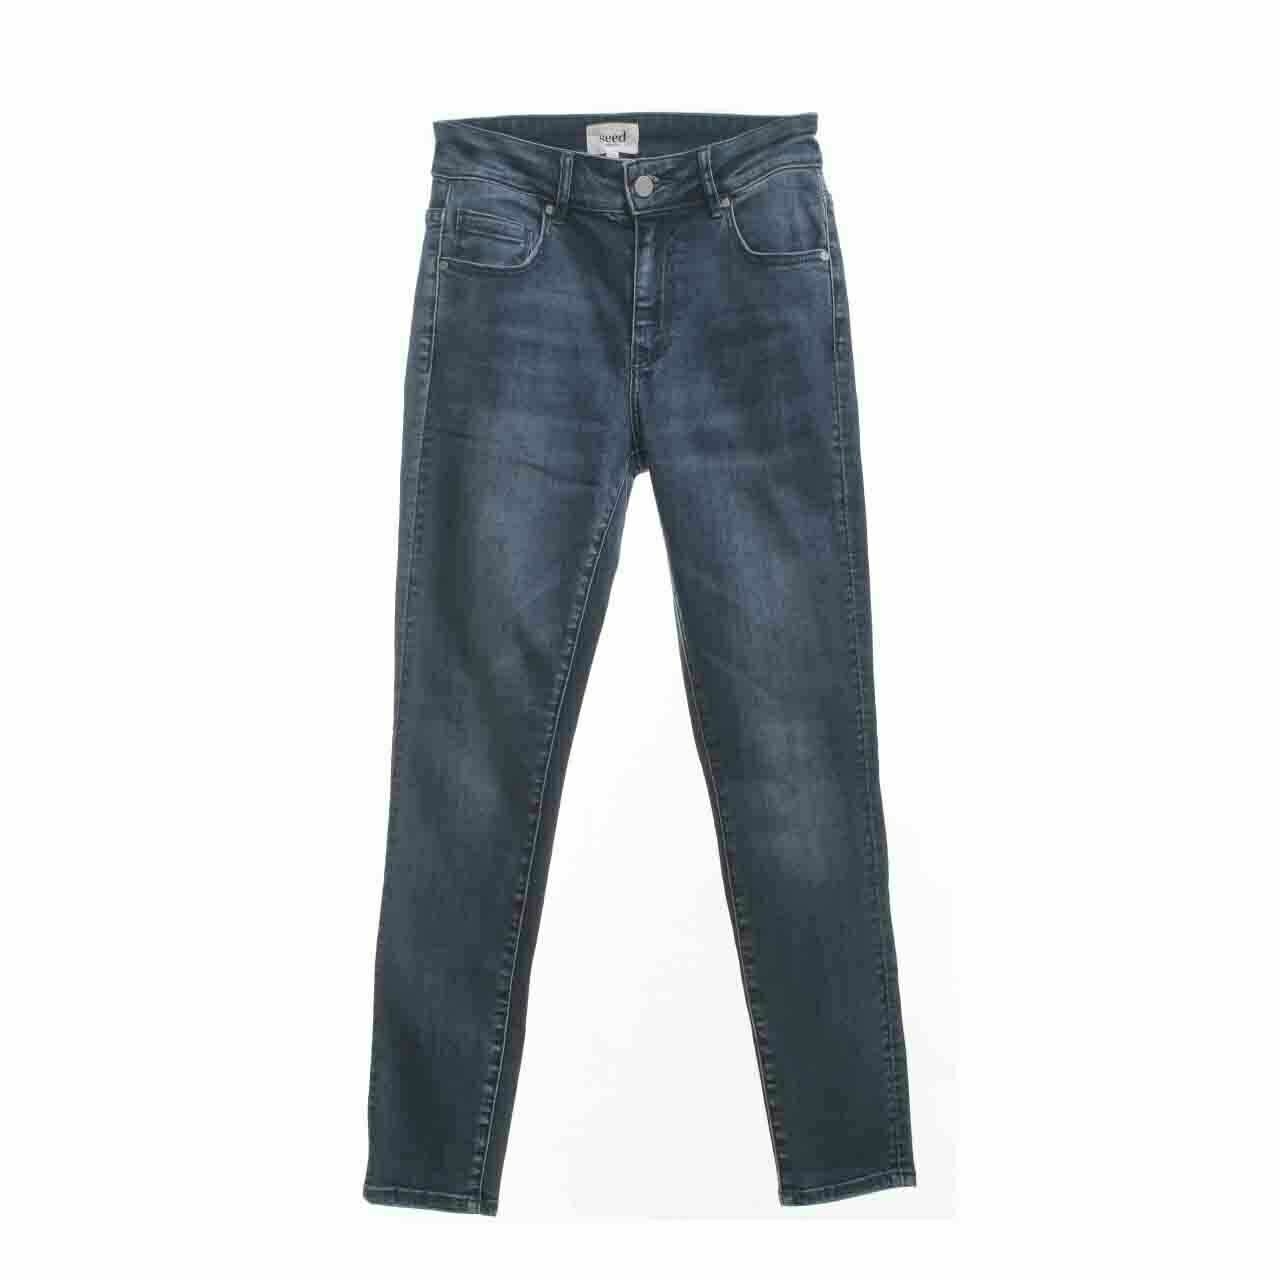 Seed Heritage Navy Long Pants Jeans